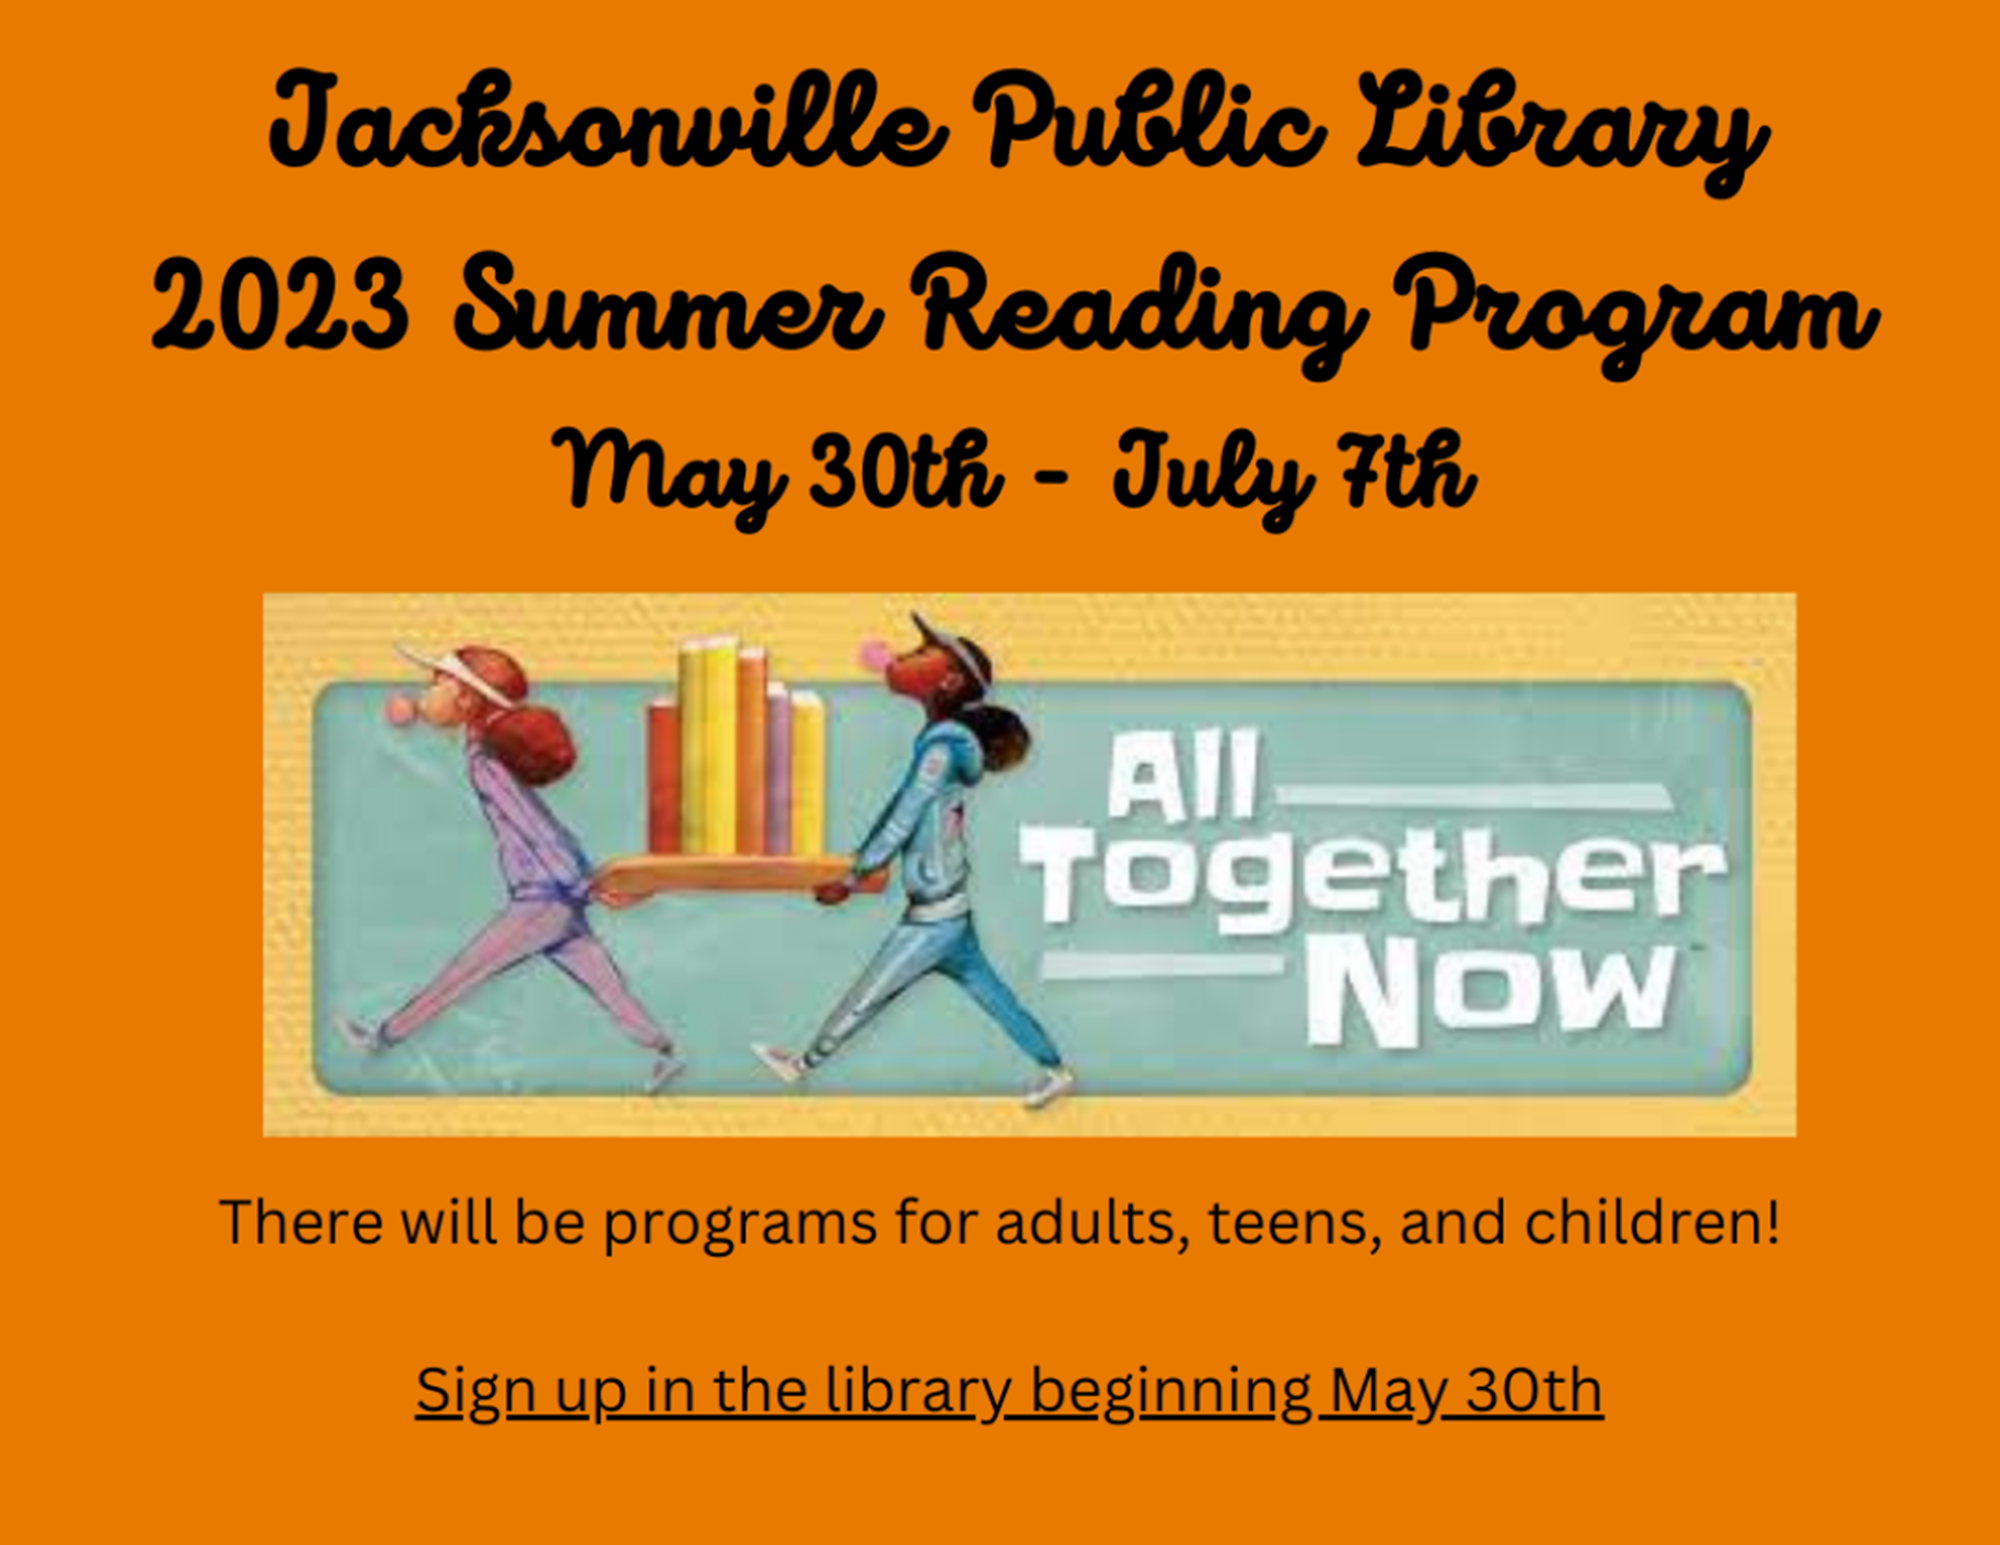 It's that time of year again! SRP 2023 is almost here! We will have programs for children, teens, and adults. Register in the library beginning May 30th.